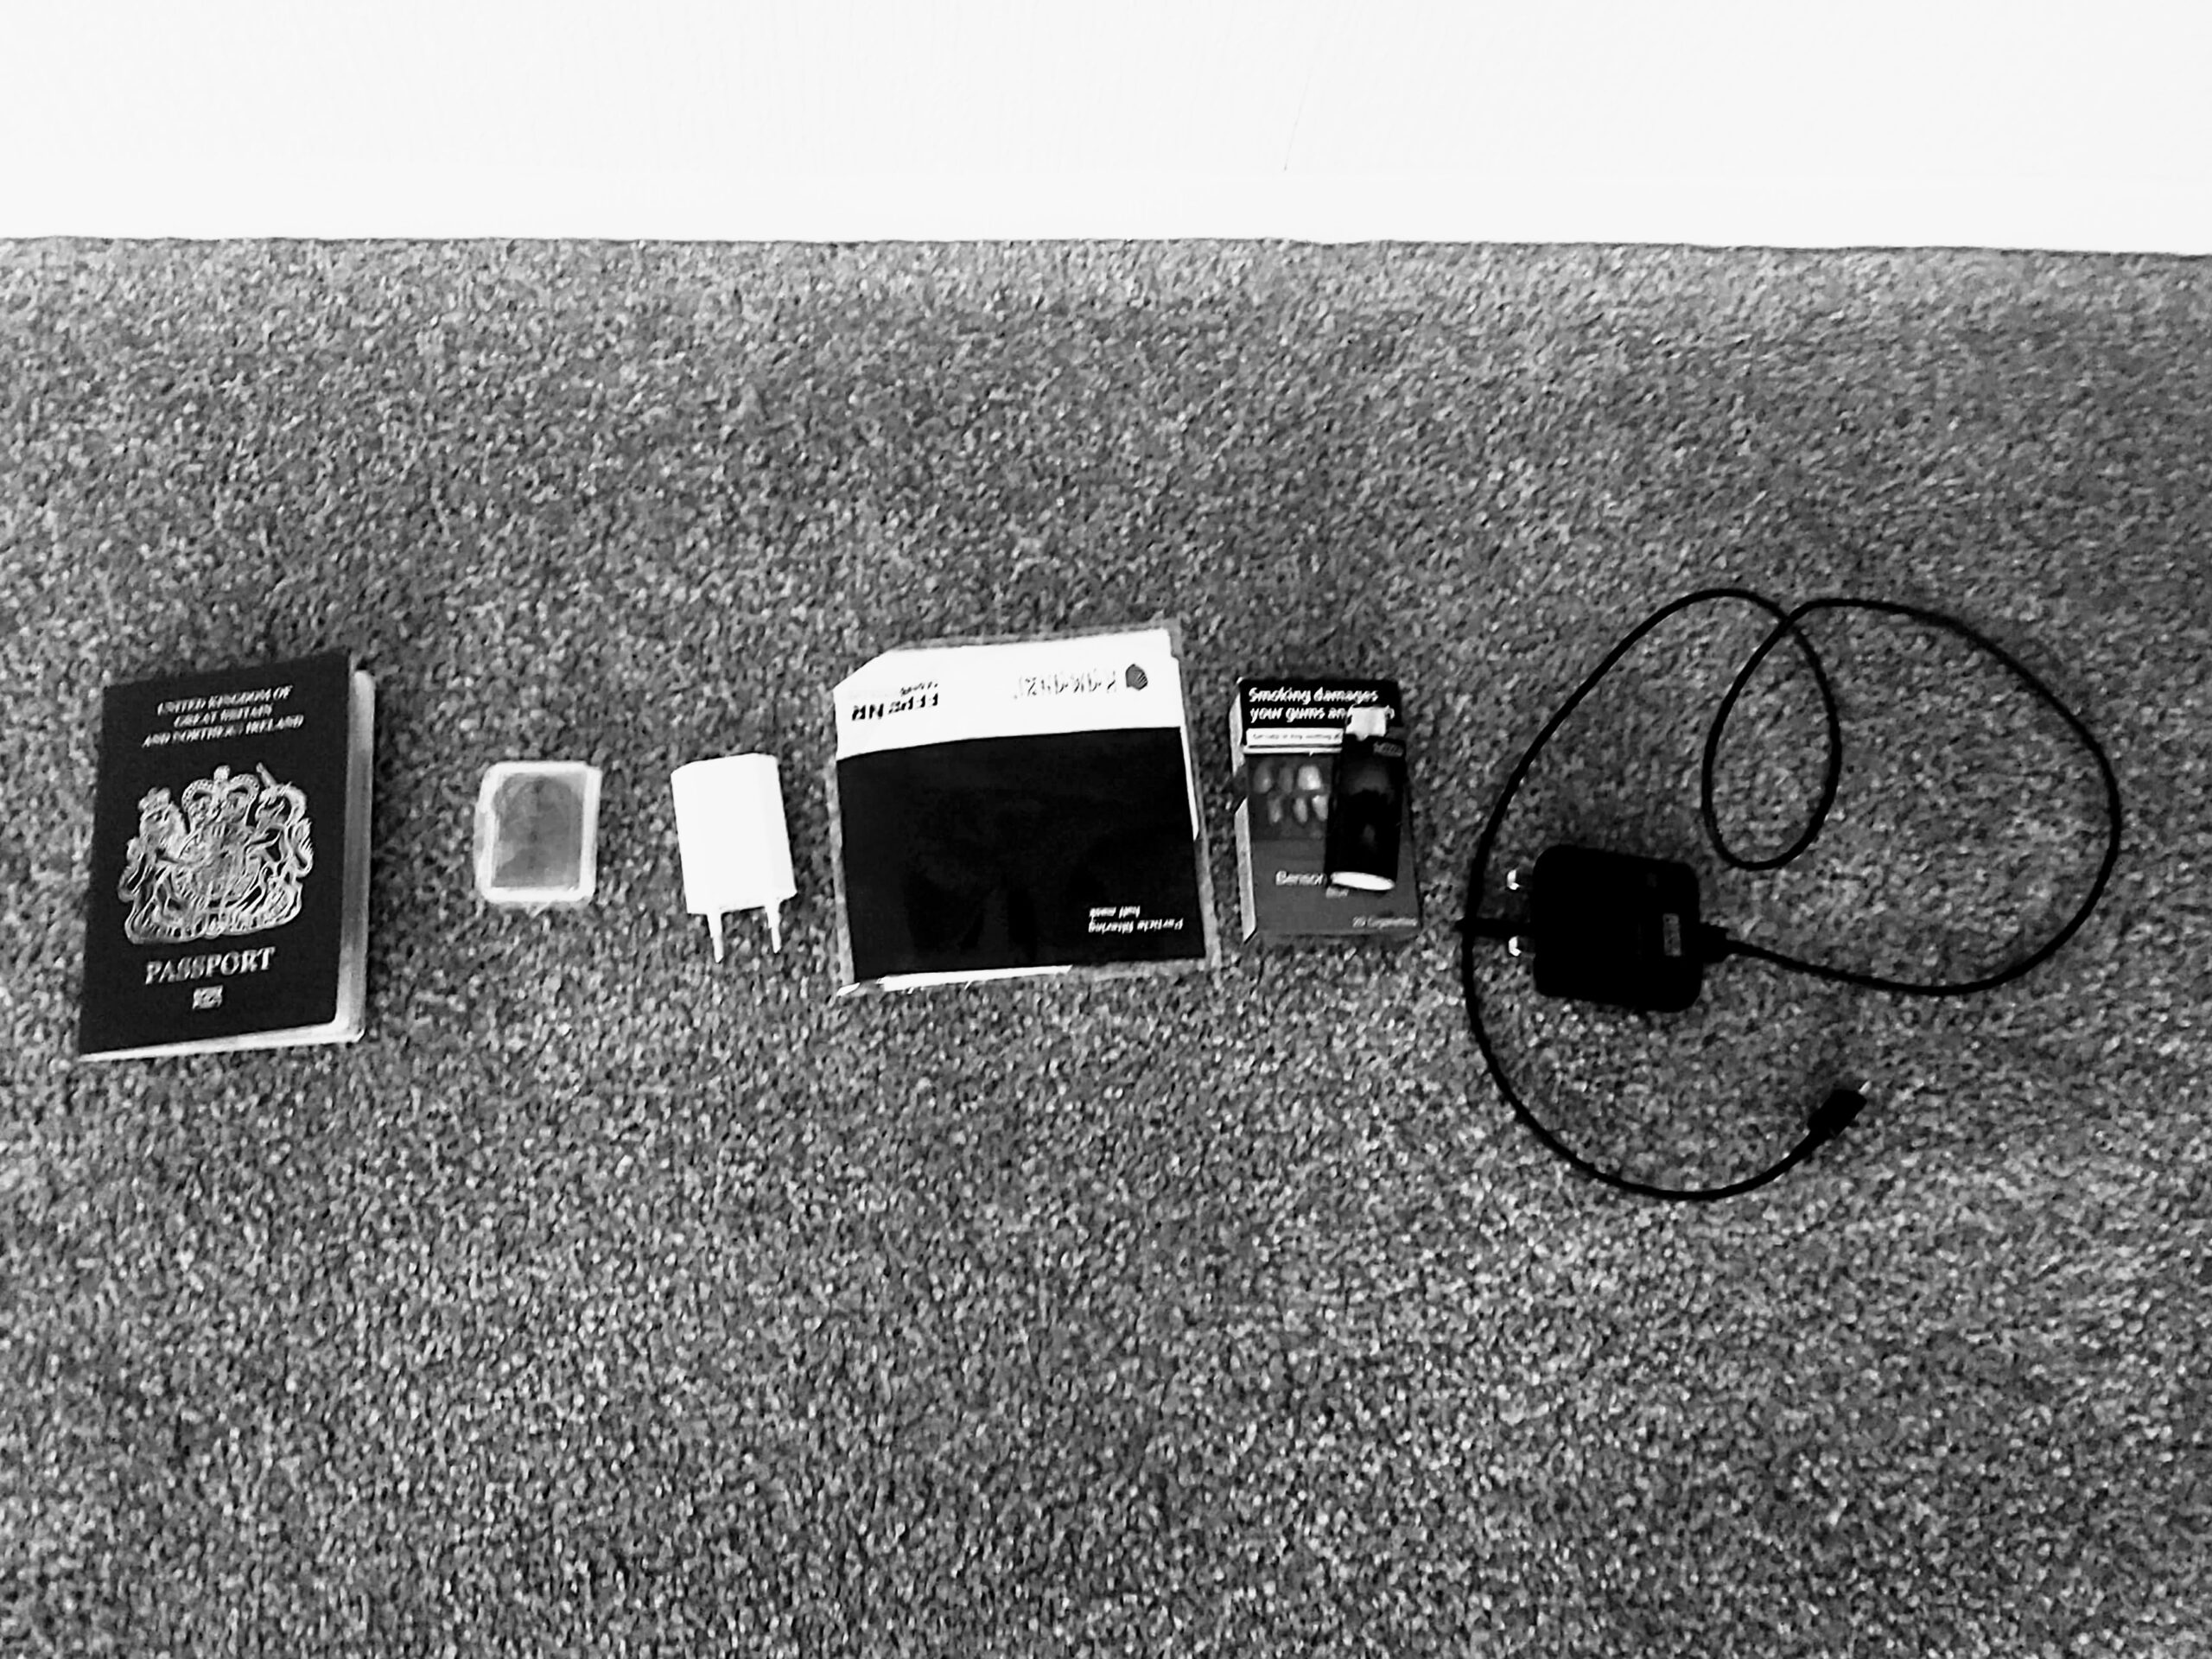 A selection of travel essentials laid out including passport and charger